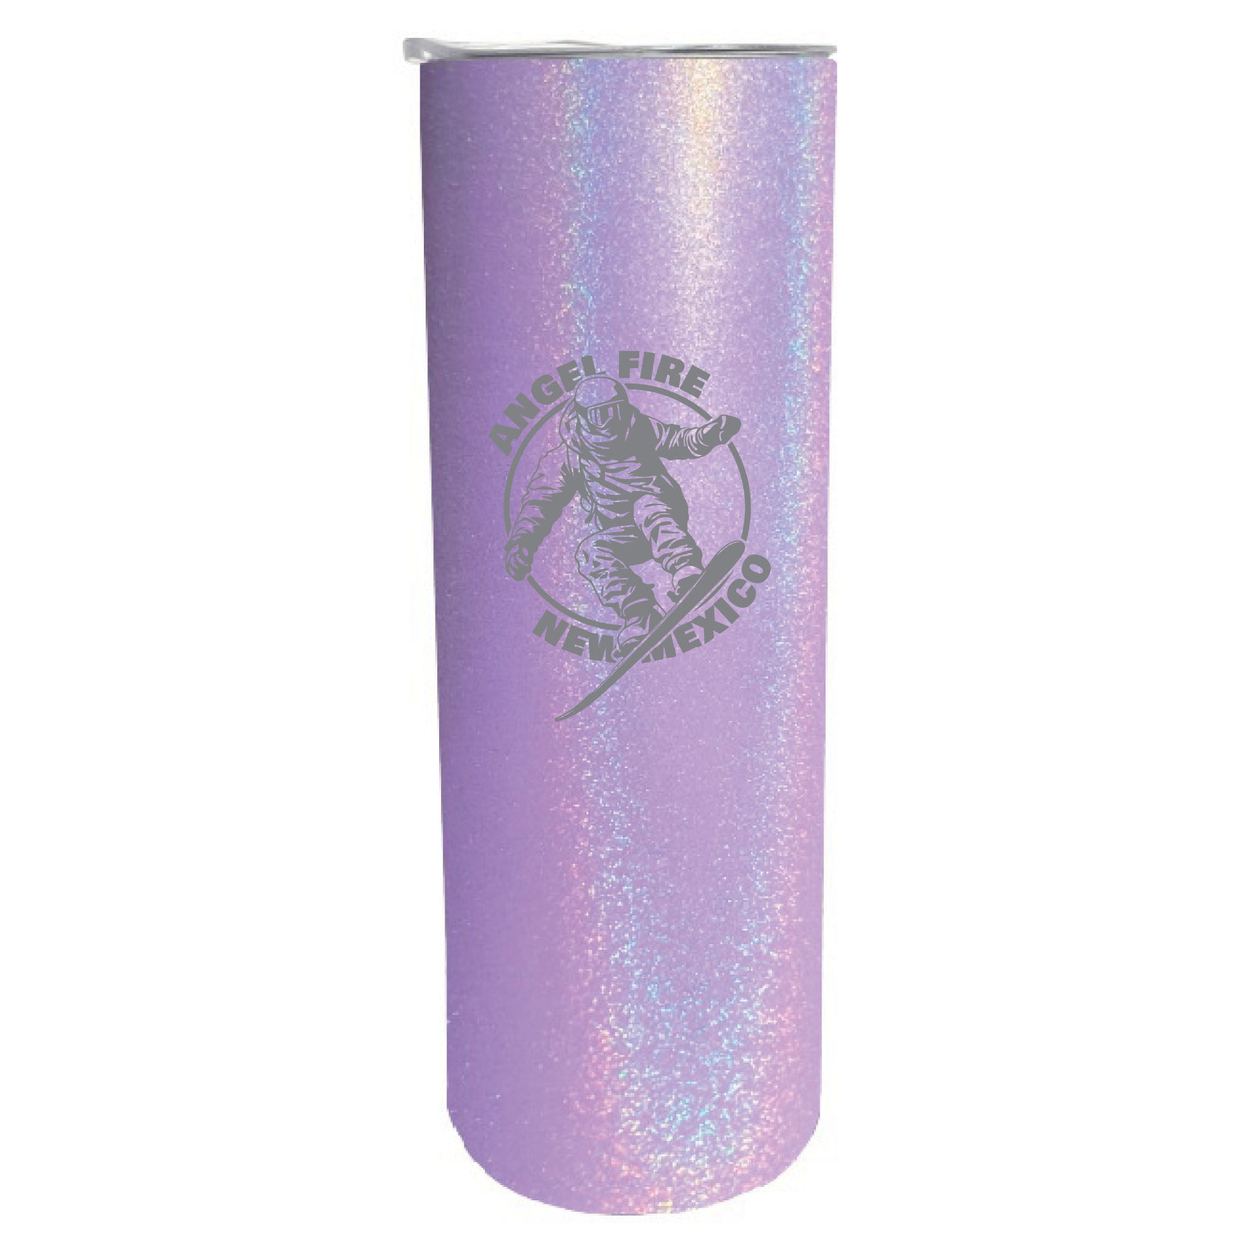 Angel Fire New Mexico Souvenir 20 Oz Engraved Insulated Stainless Steel Skinny Tumbler - Navy,,4-Pack